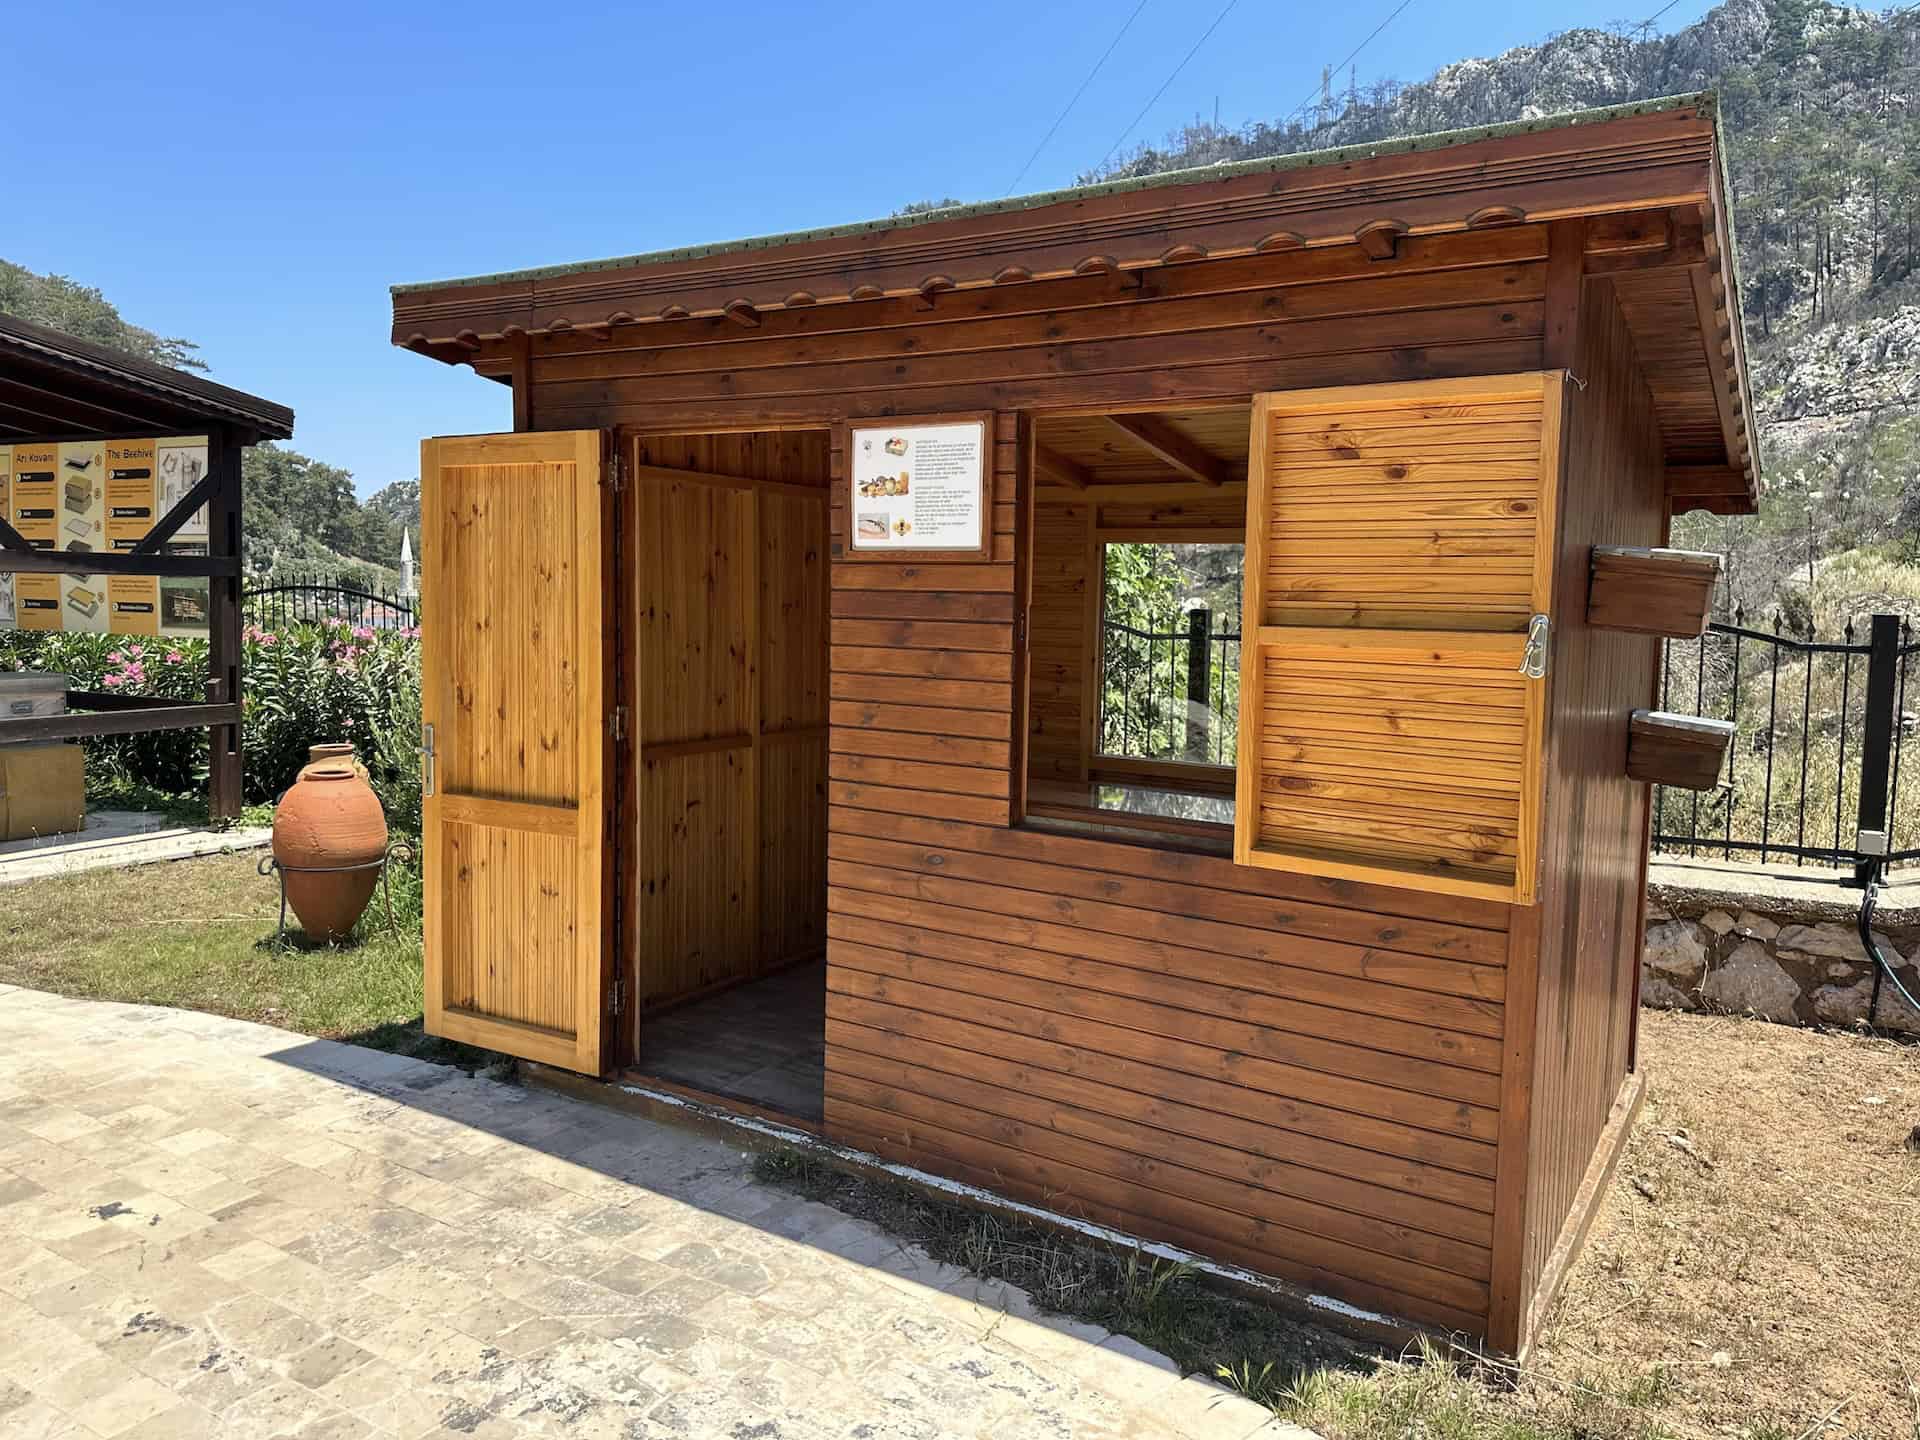 First apitherapy house at the Marmaris Honey House